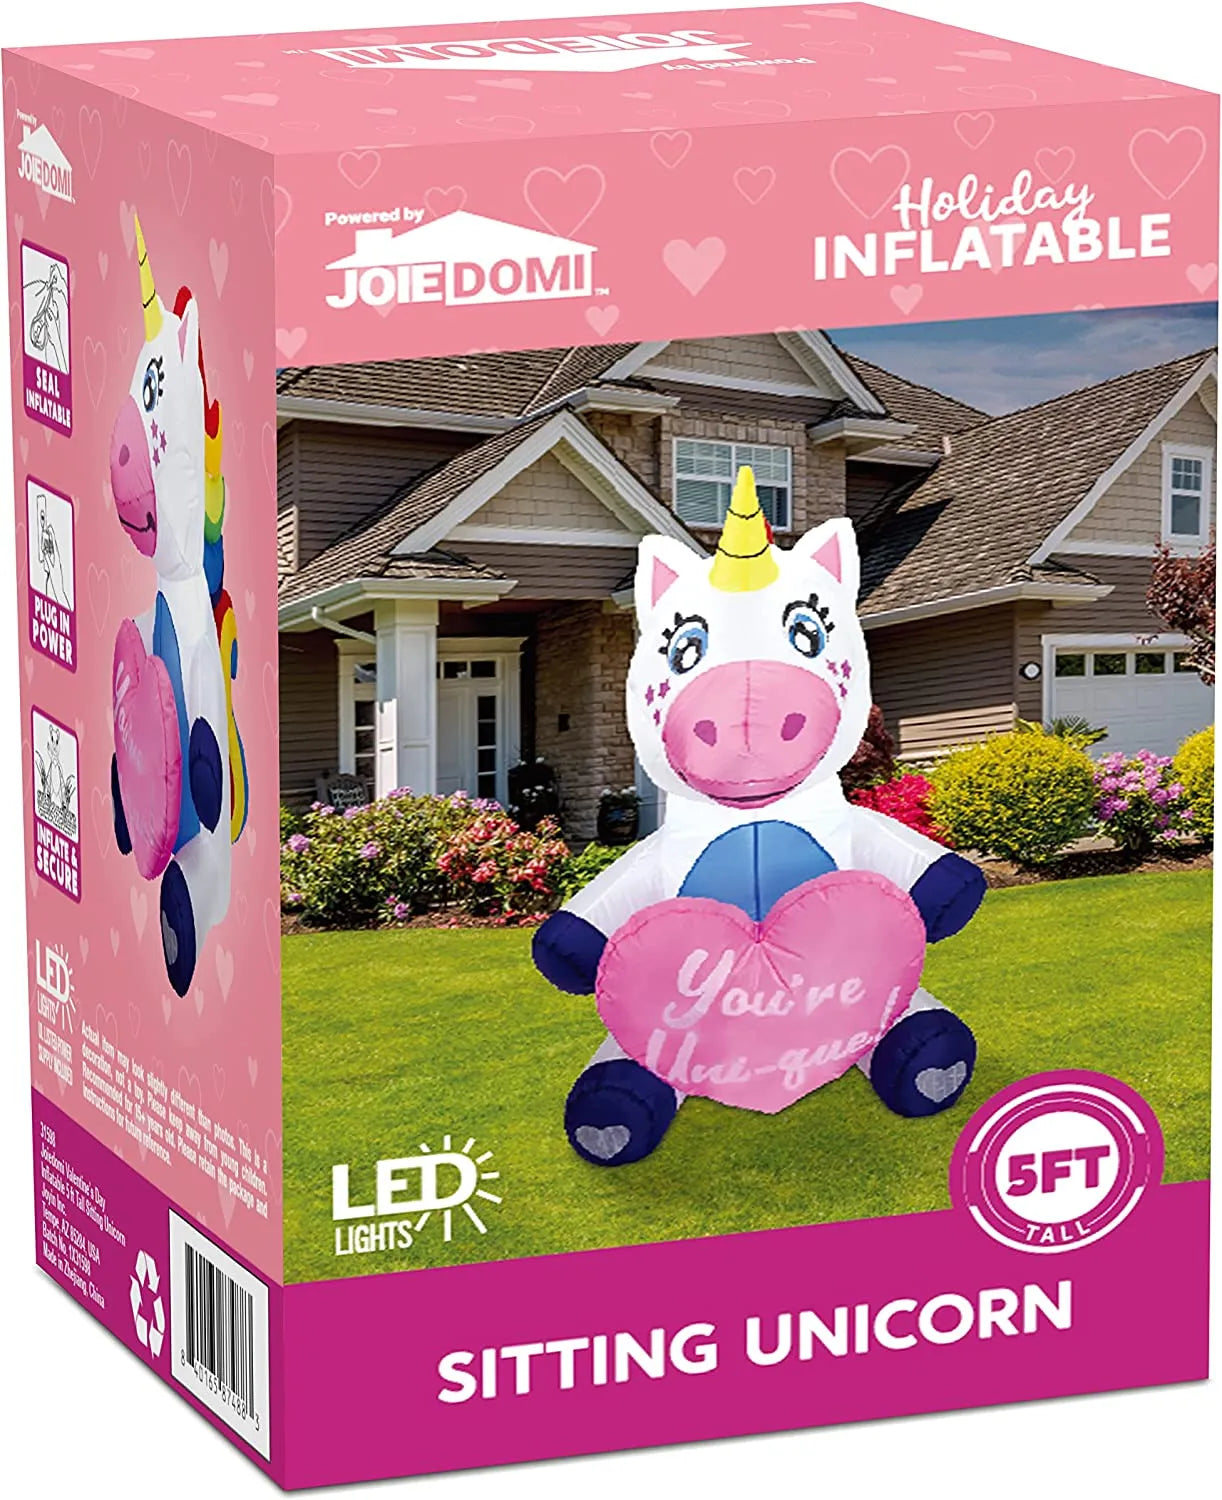 5FT Tall Sitting inflatable ride a unicorn costume Yard Decoration